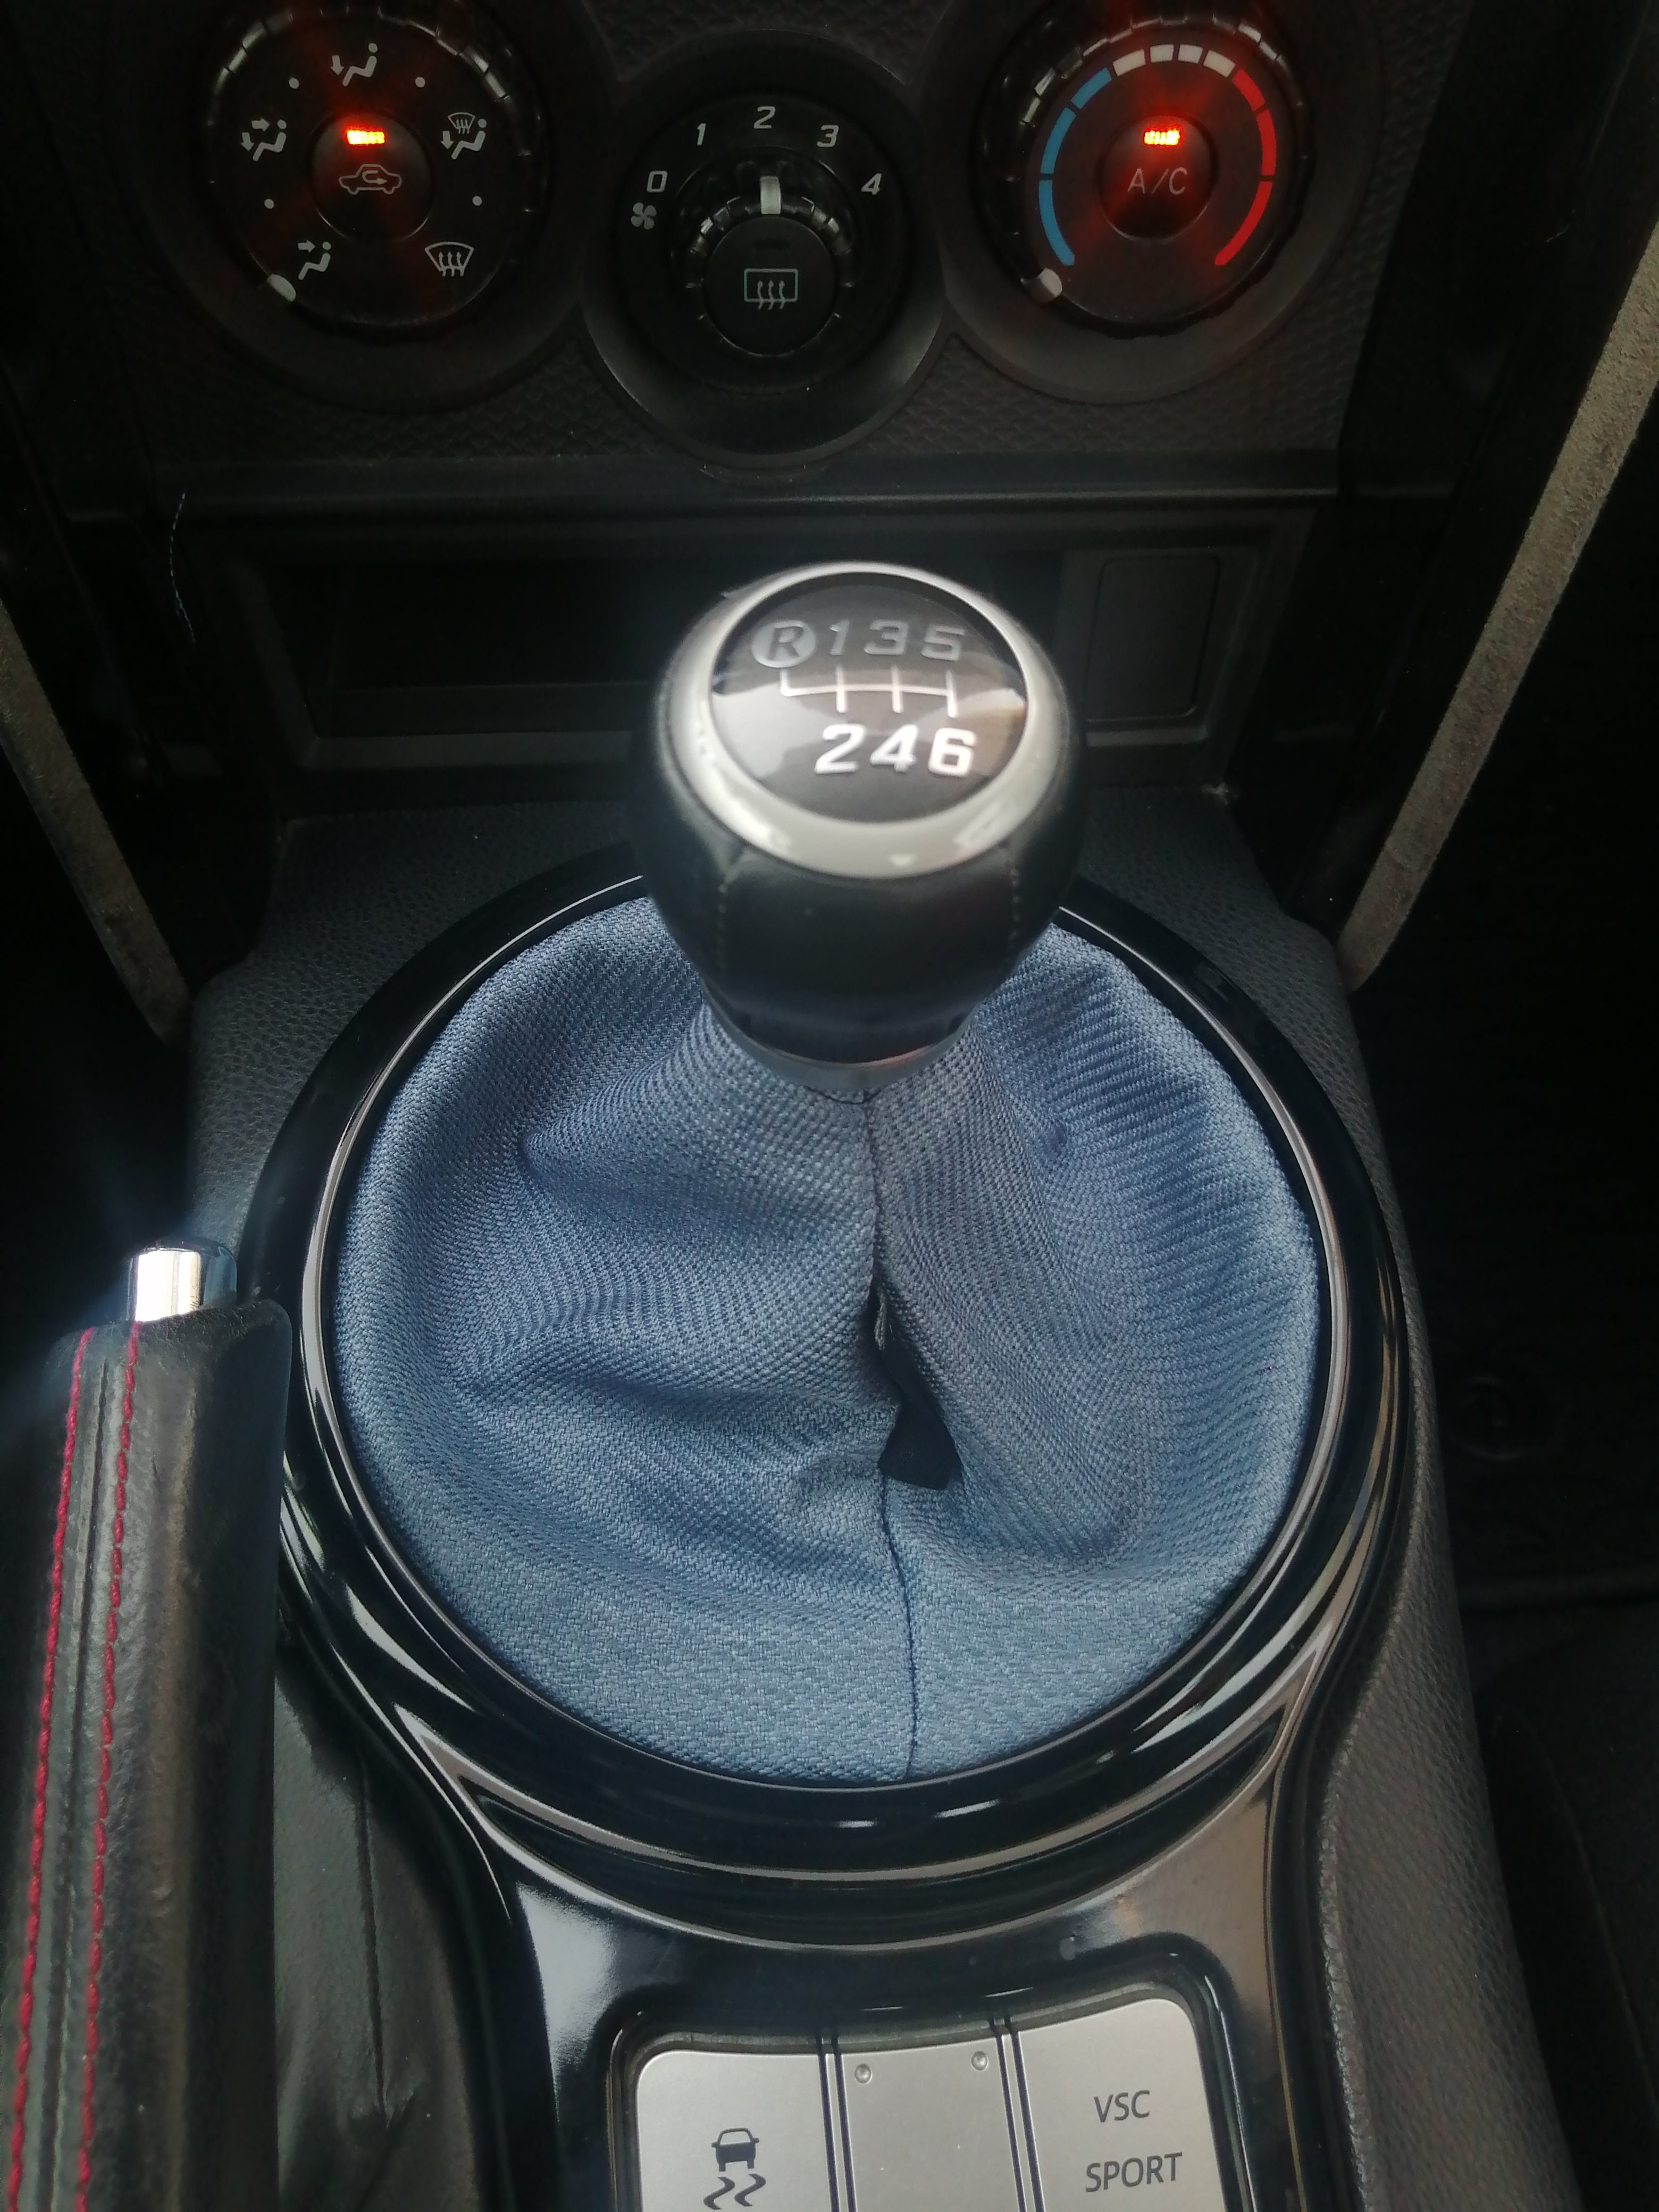  suede shift boot cover , nissan shift boot cover , subaru shift boot cover , toyota shift boot cover , schassis shift boot cover , nissan z shift boot cover , skyline shift boot cover , ford shift boot cover